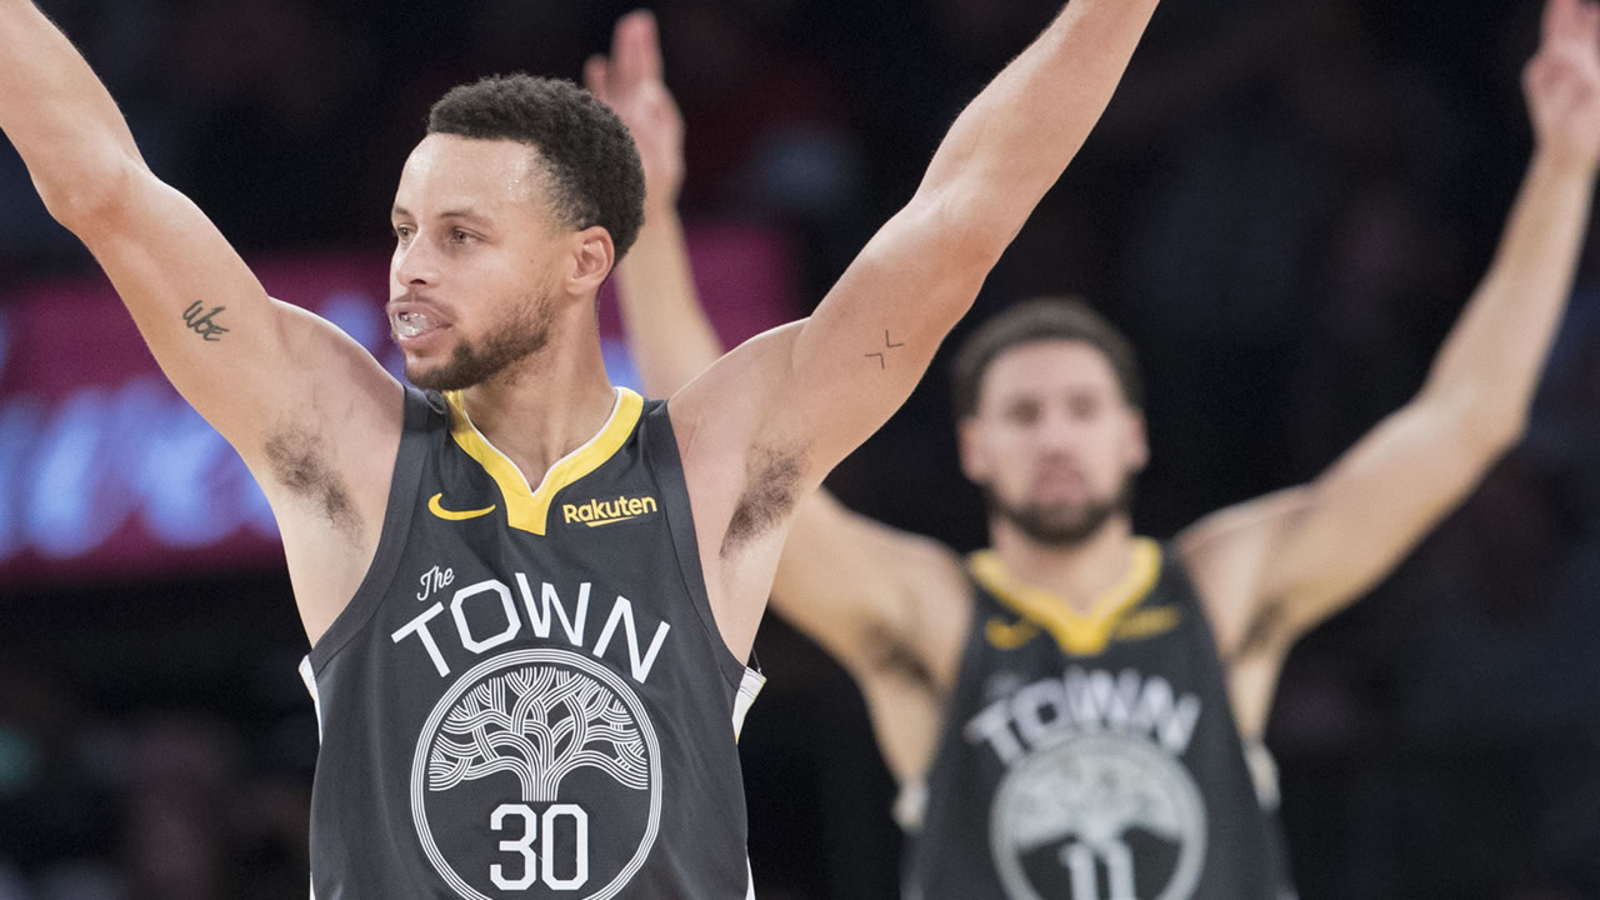 NBA All Star Weekend: Stephen Curry Wins 3 Point Contest, Dedicates Trophy To Klay Thompson San Francisco